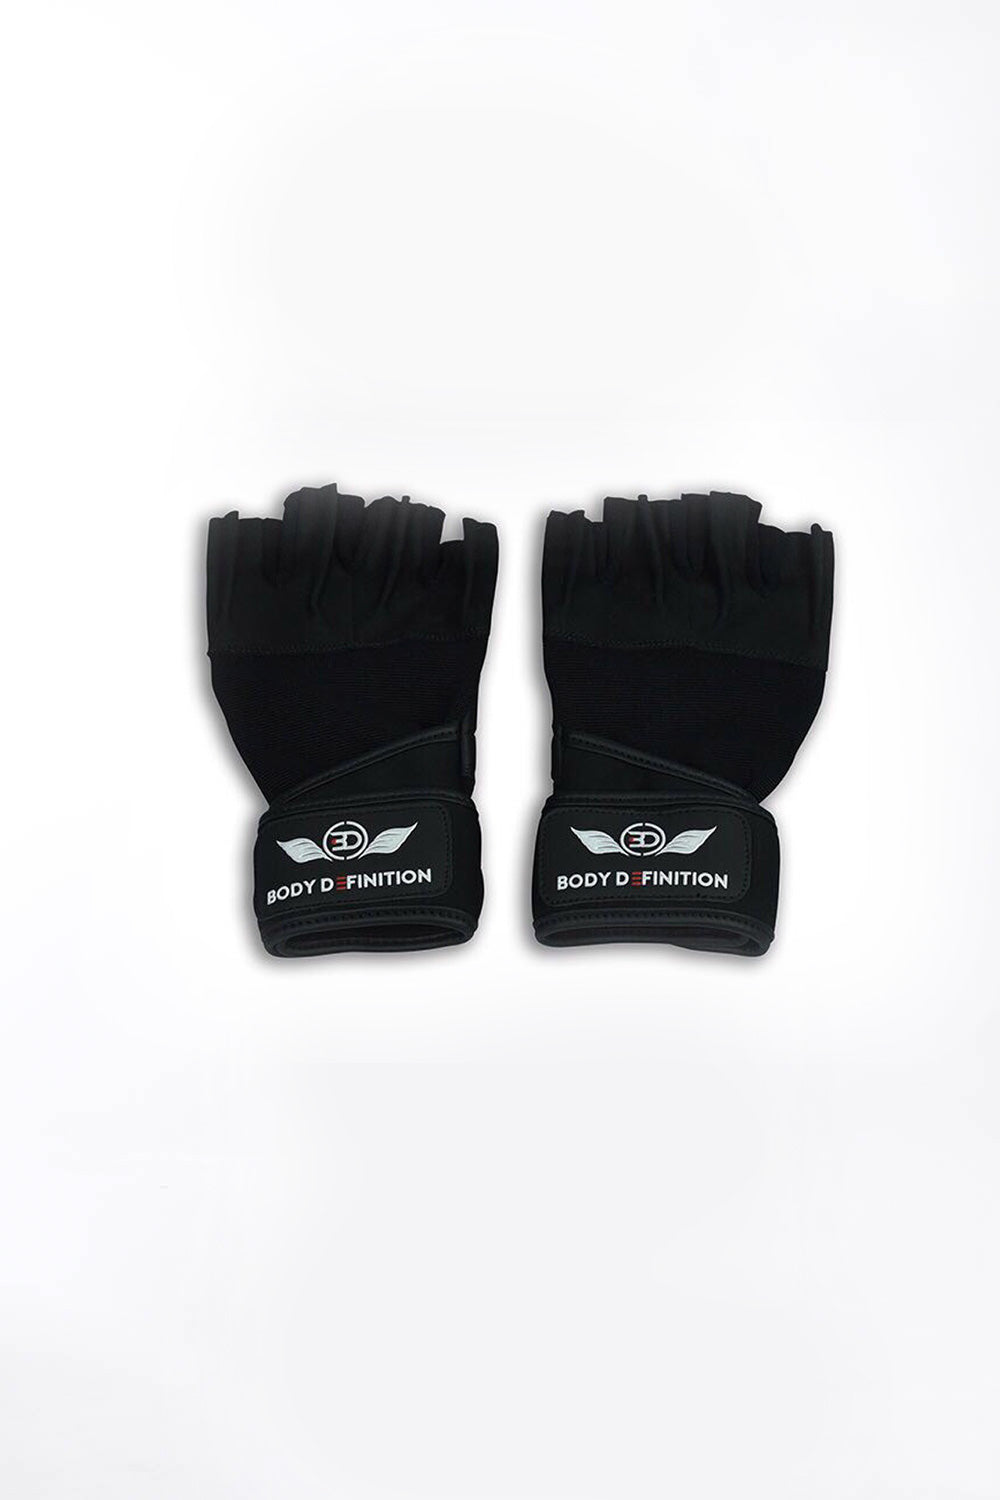 Mens Weight Lifting Gloves Long Straps Body Definition